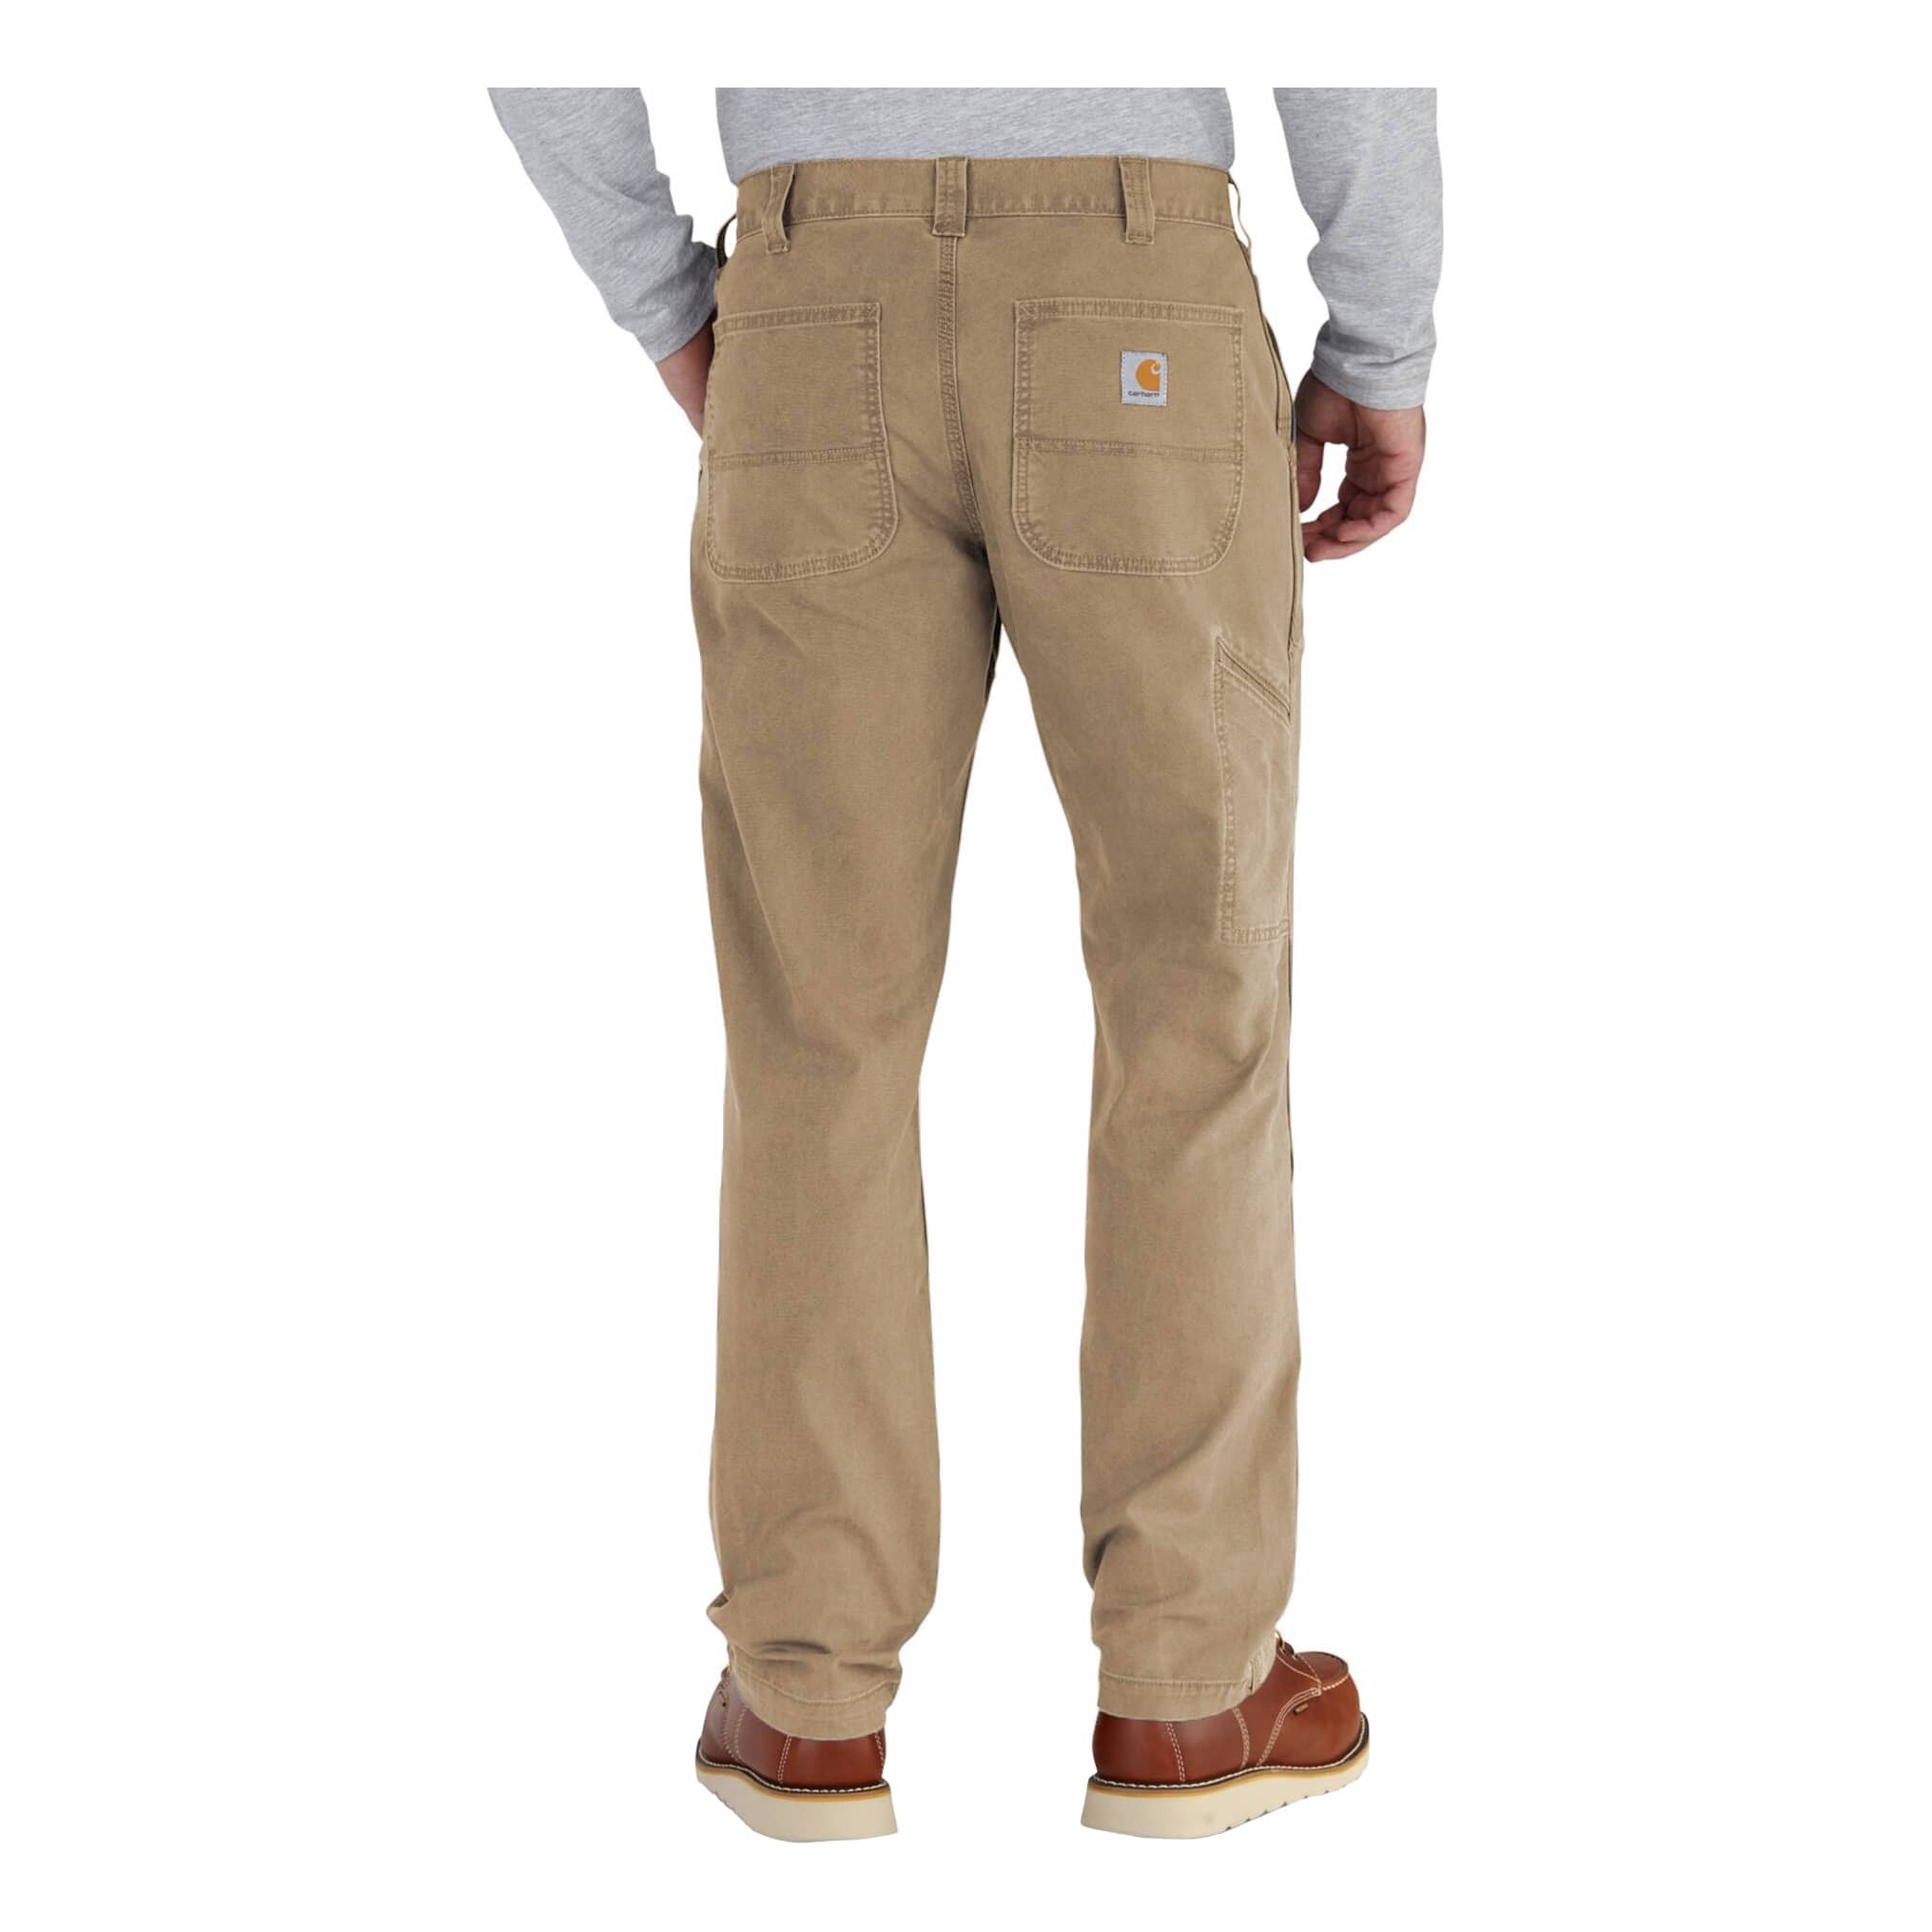 Carhartt Men's 36 x 34 in. Brown Cotton/Spandex Rugged Flex Relaxed Fit  Duck Dungaree Pant 103279-211 - The Home Depot